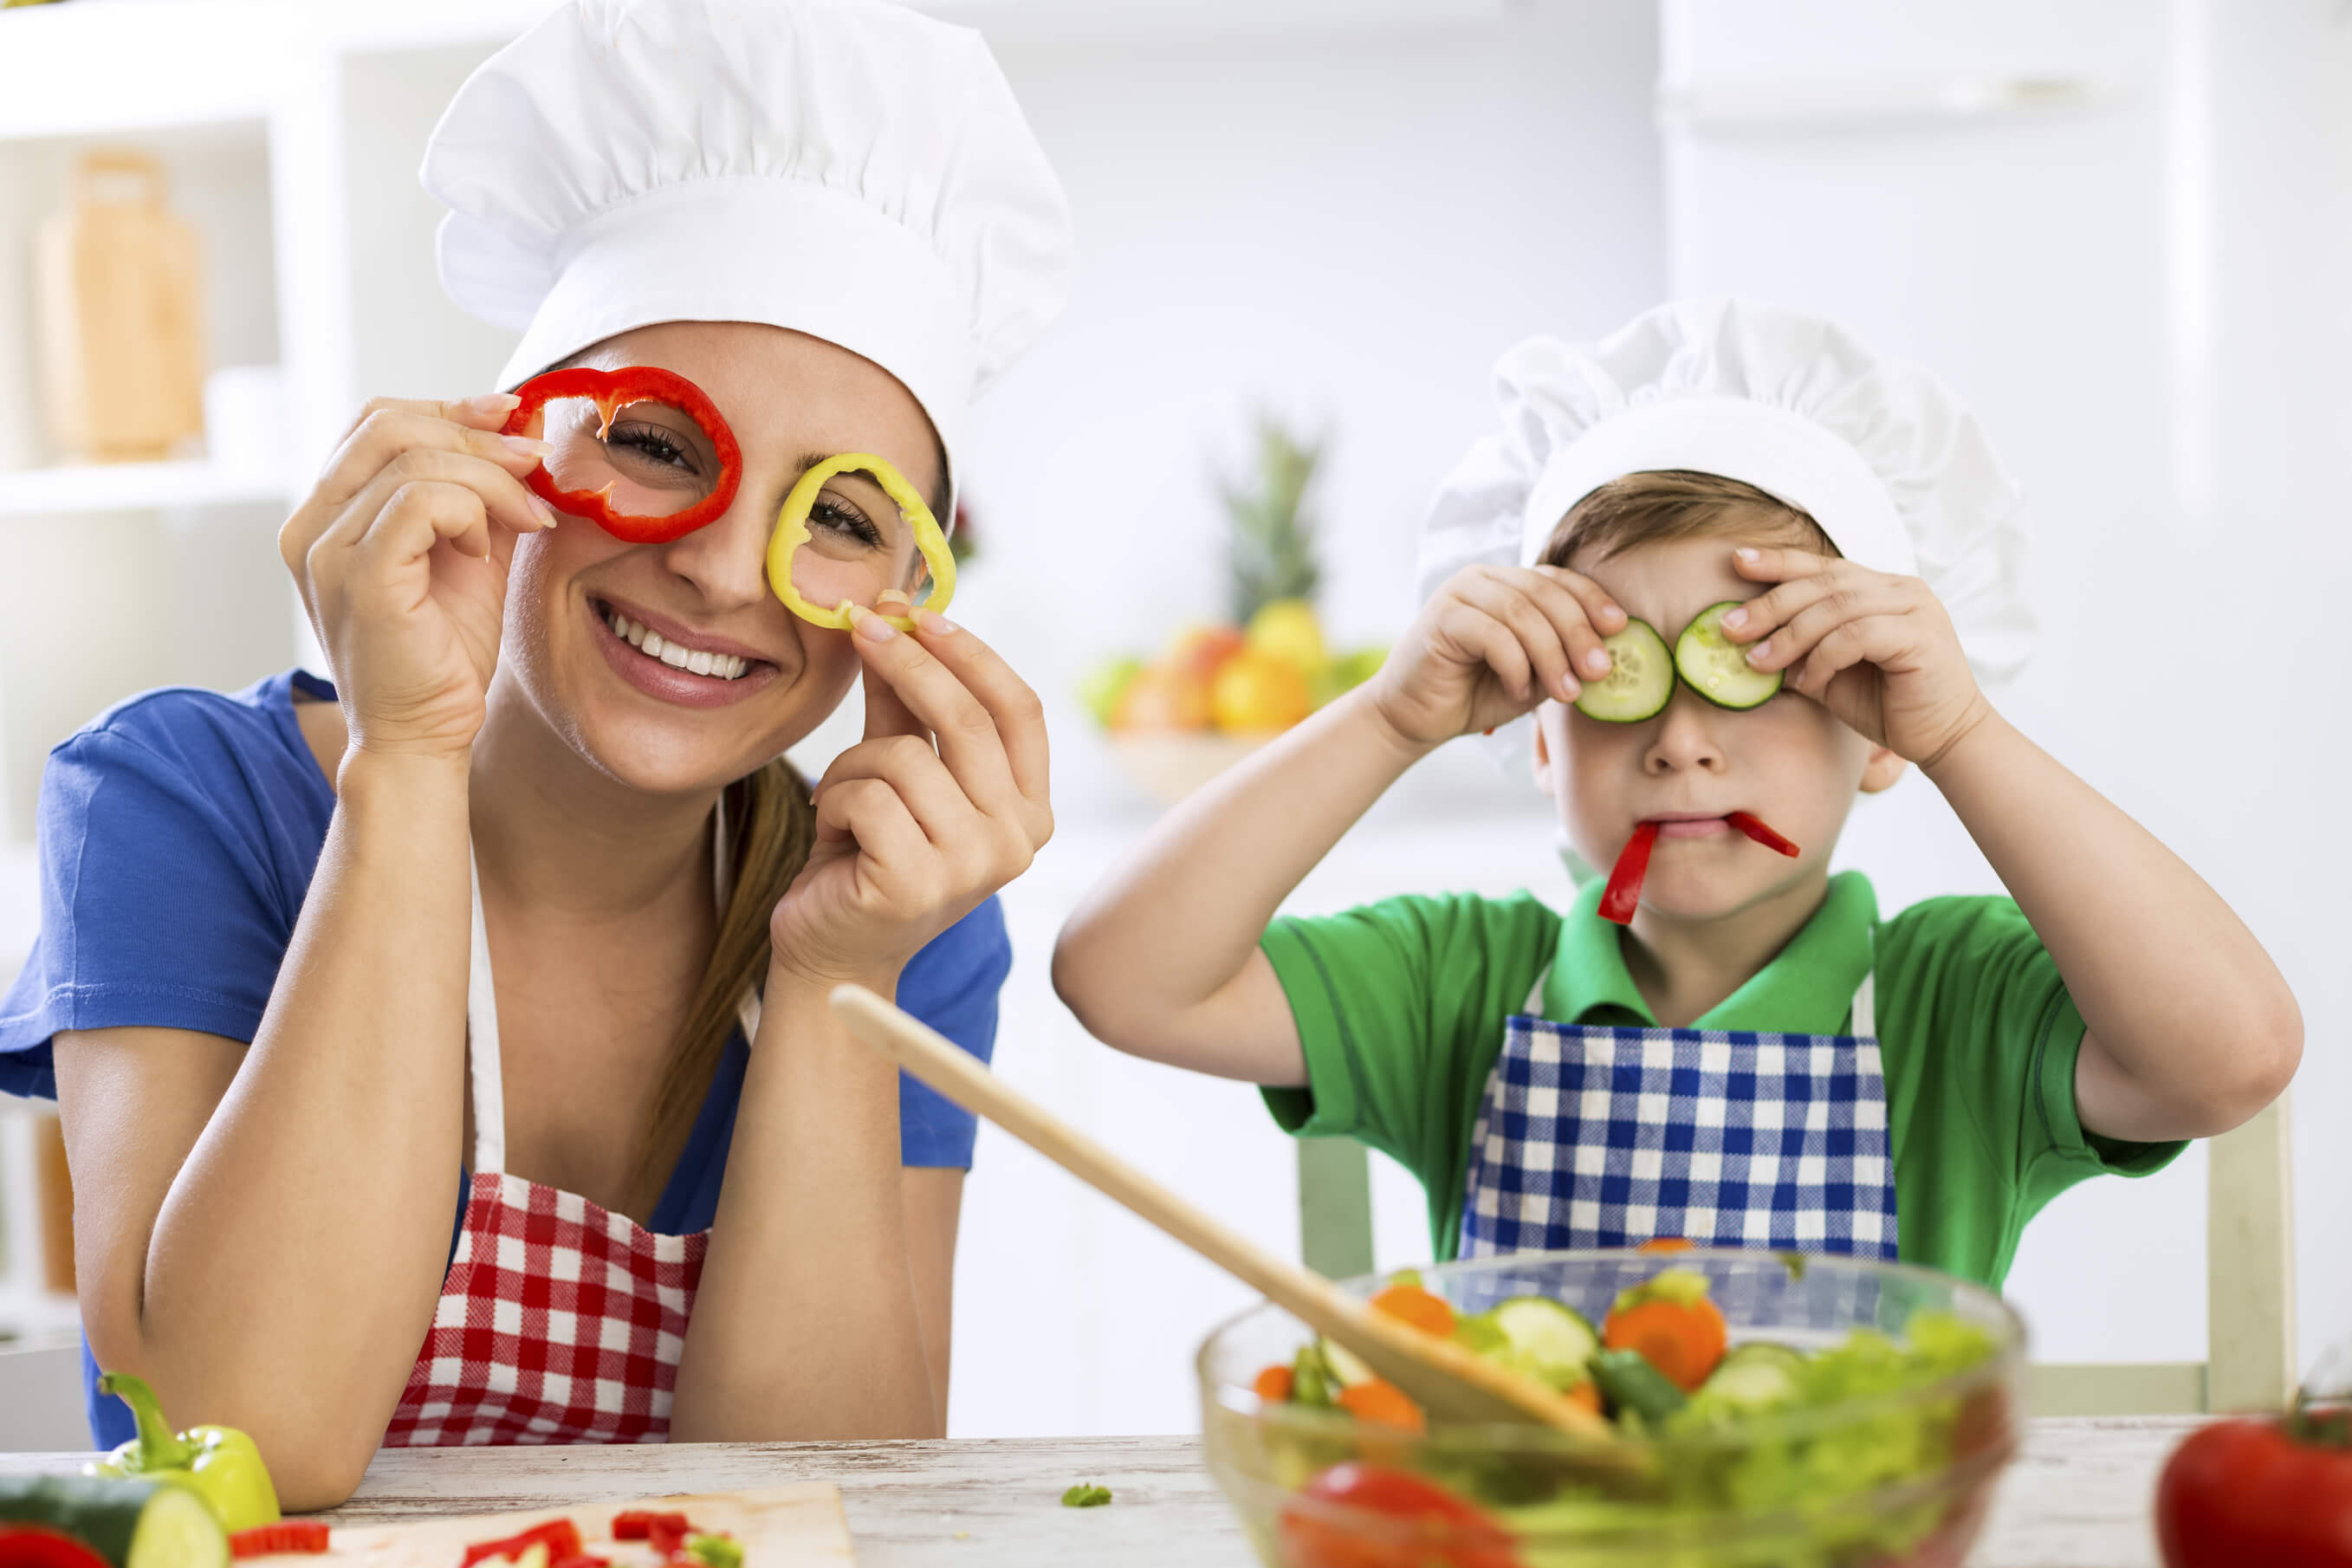 Help your kids eat healthier by talking less, doing more